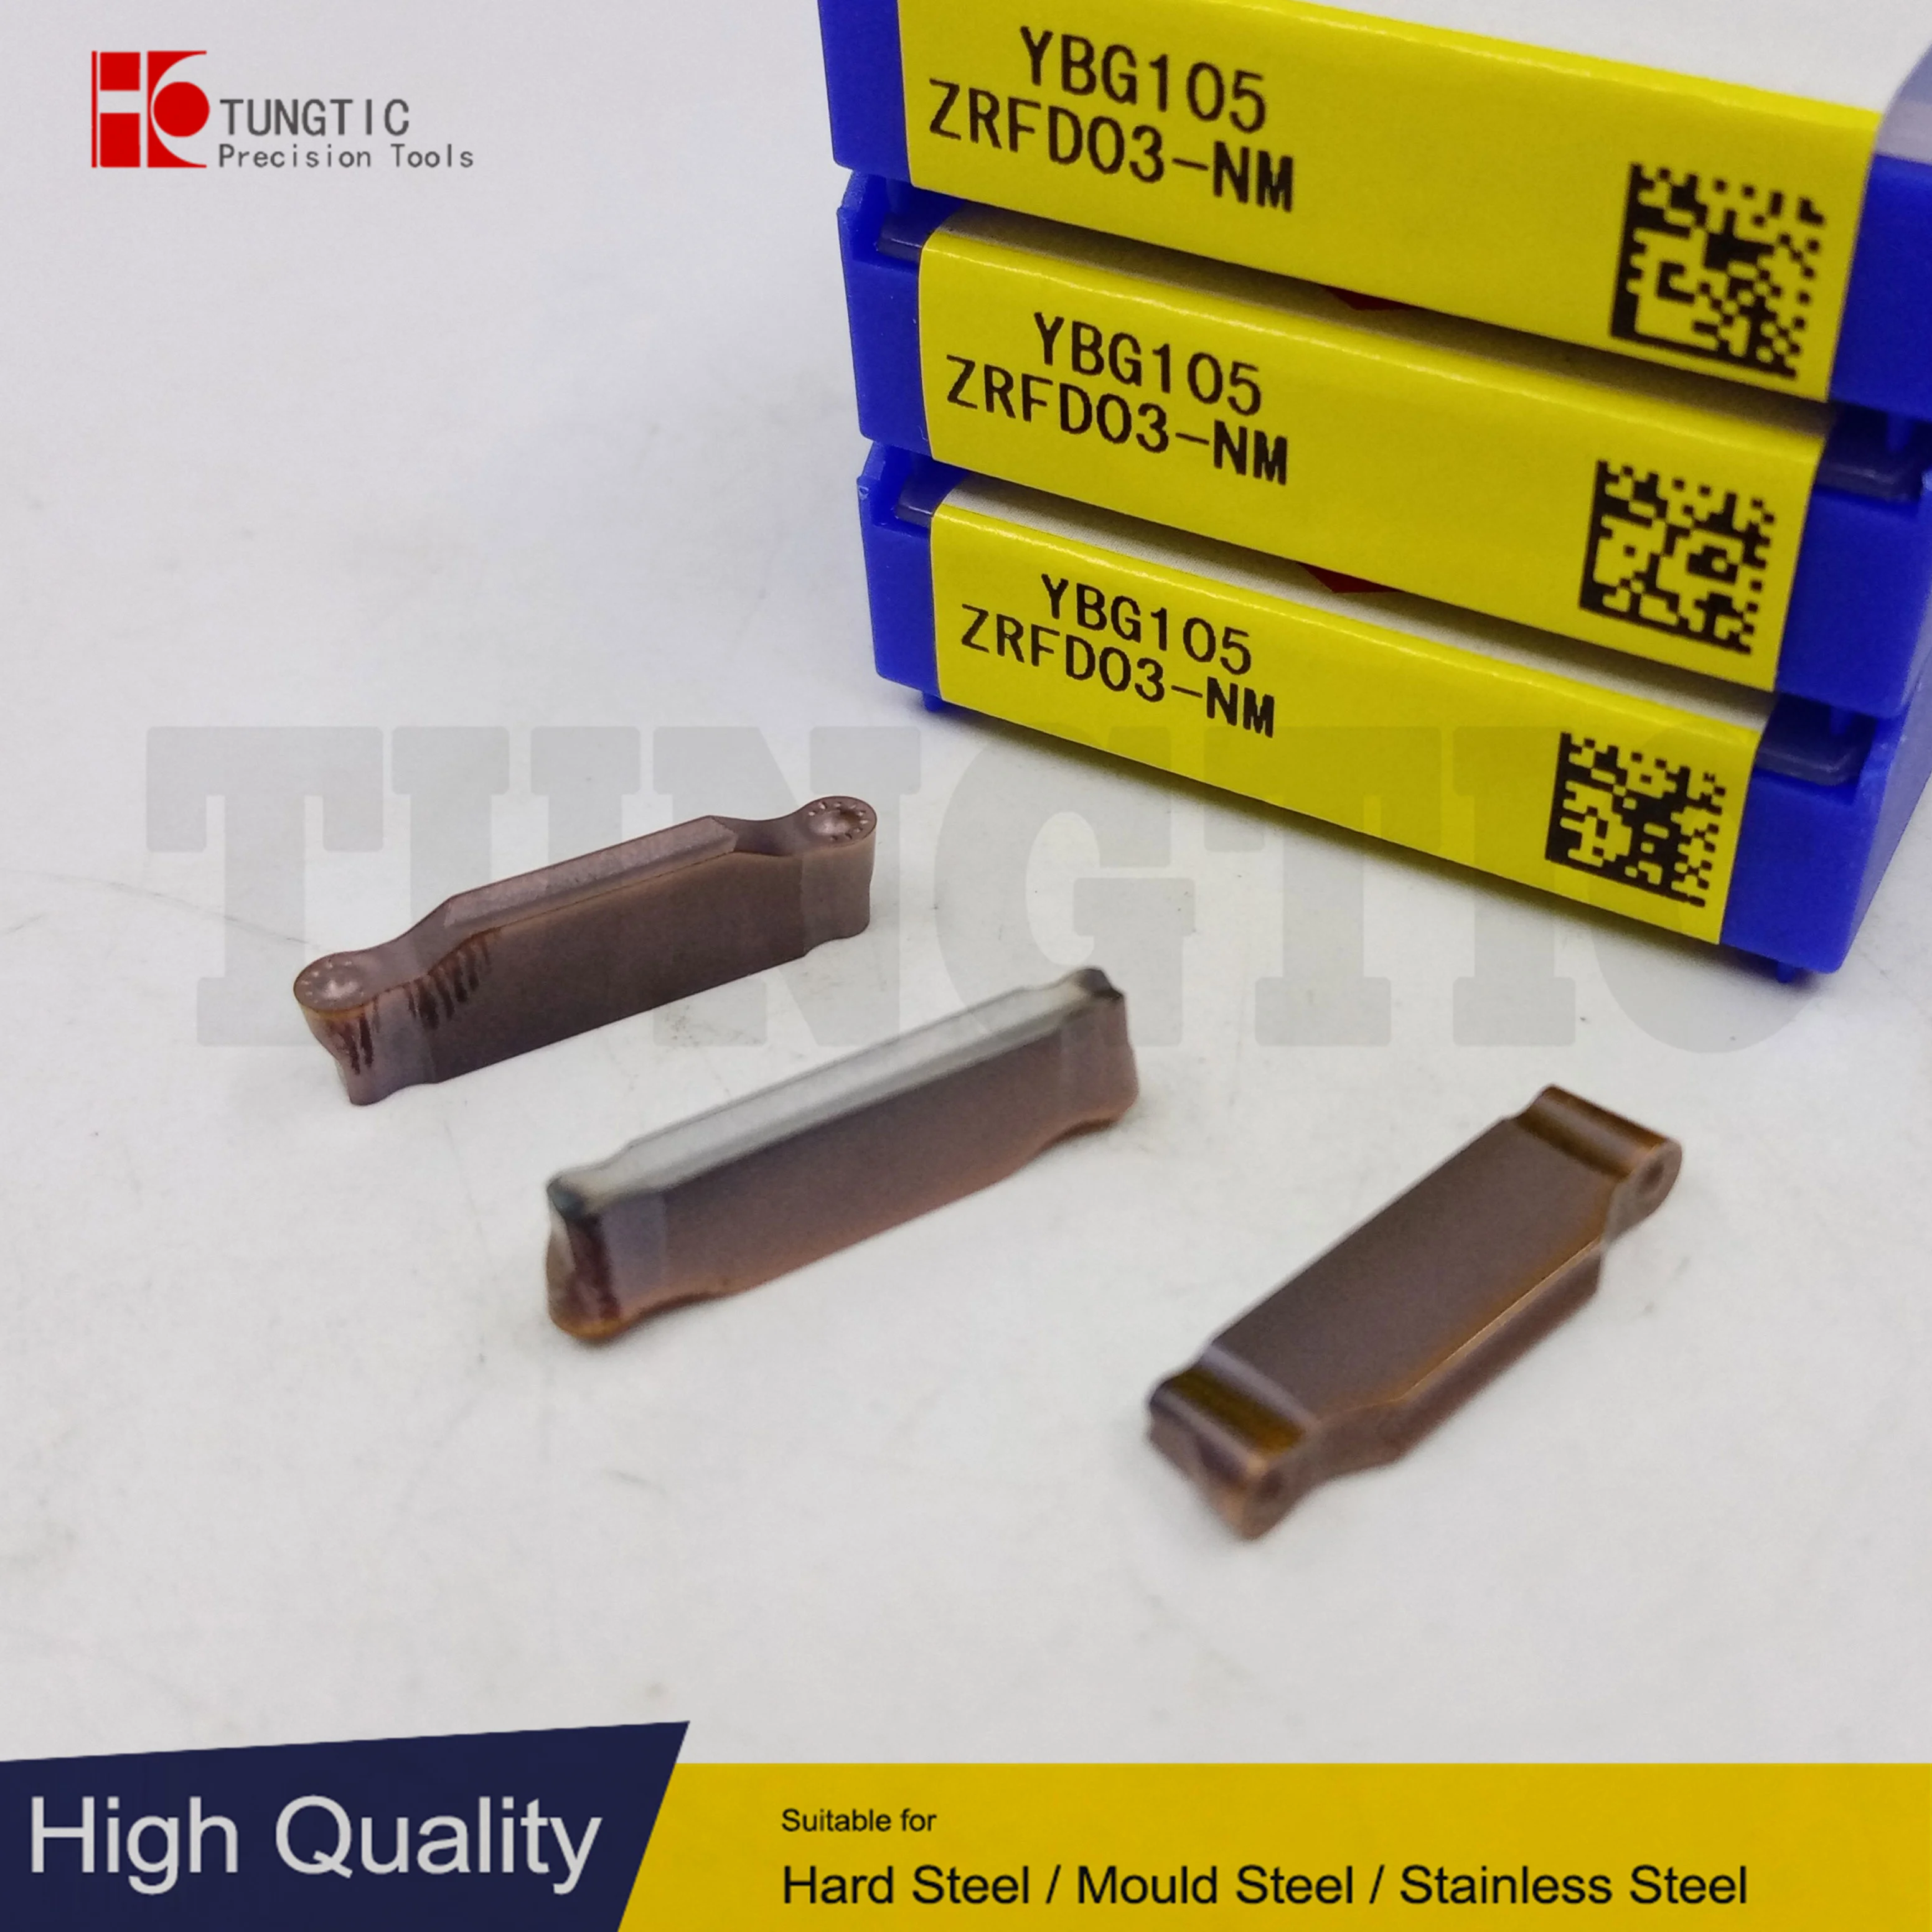 

TUNGTIC ZRFD 03-NM ZRFD03-NM Turning Inserts Carbide Cutter For Cast Iron